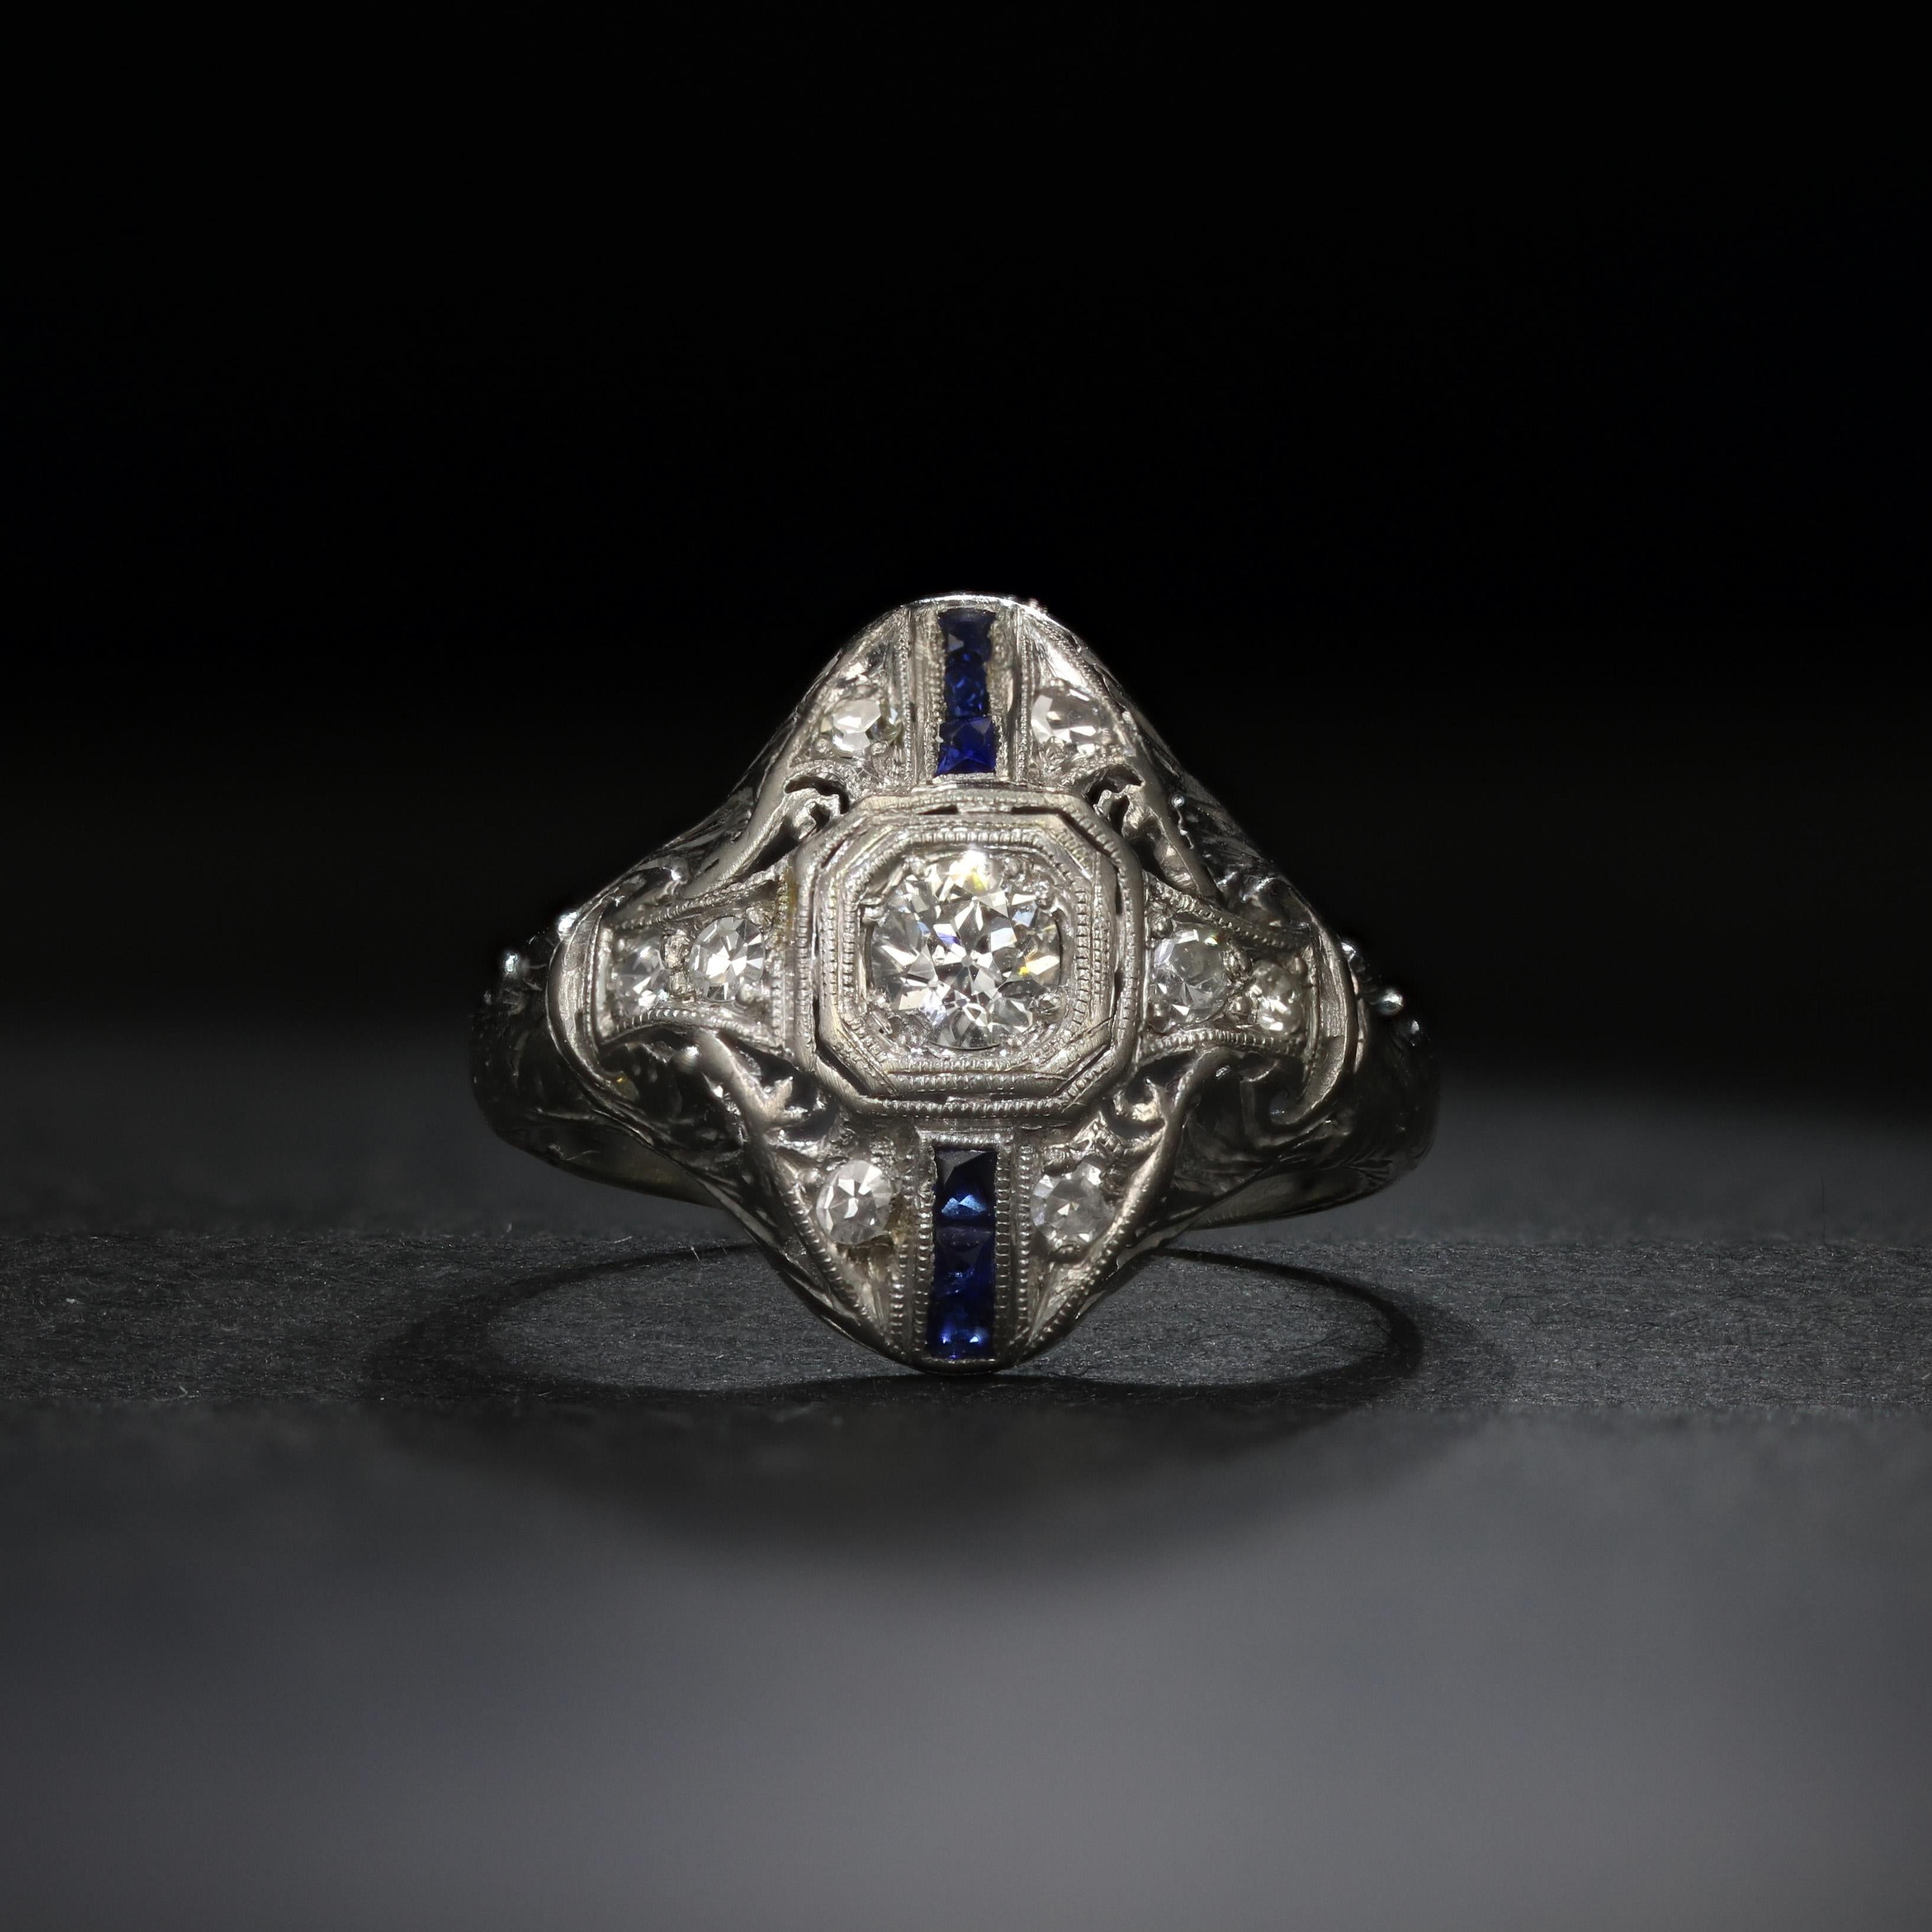 In the center of this gorgeously engraved platinum ring is an old mine diamond of half a carat. Several more old mine diamonds enrich the top of this artfully crafted ring. Accentuating the diamonds is a column of square-cut sapphires, adding a